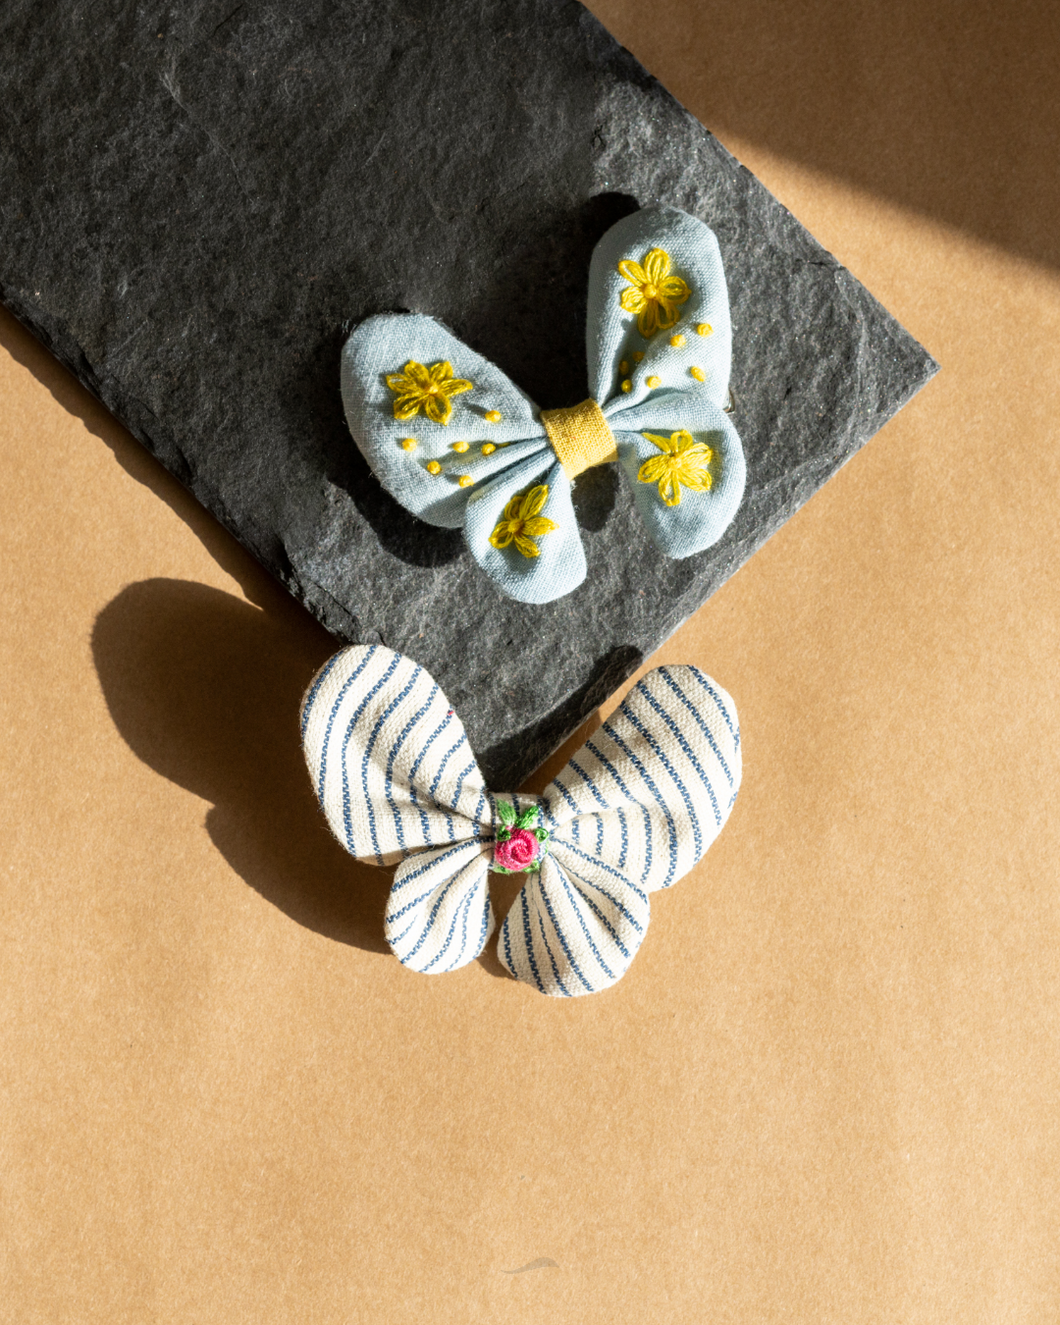 A very cute and beautiful butterfly combo hair accessory placed upon a grey sheet.